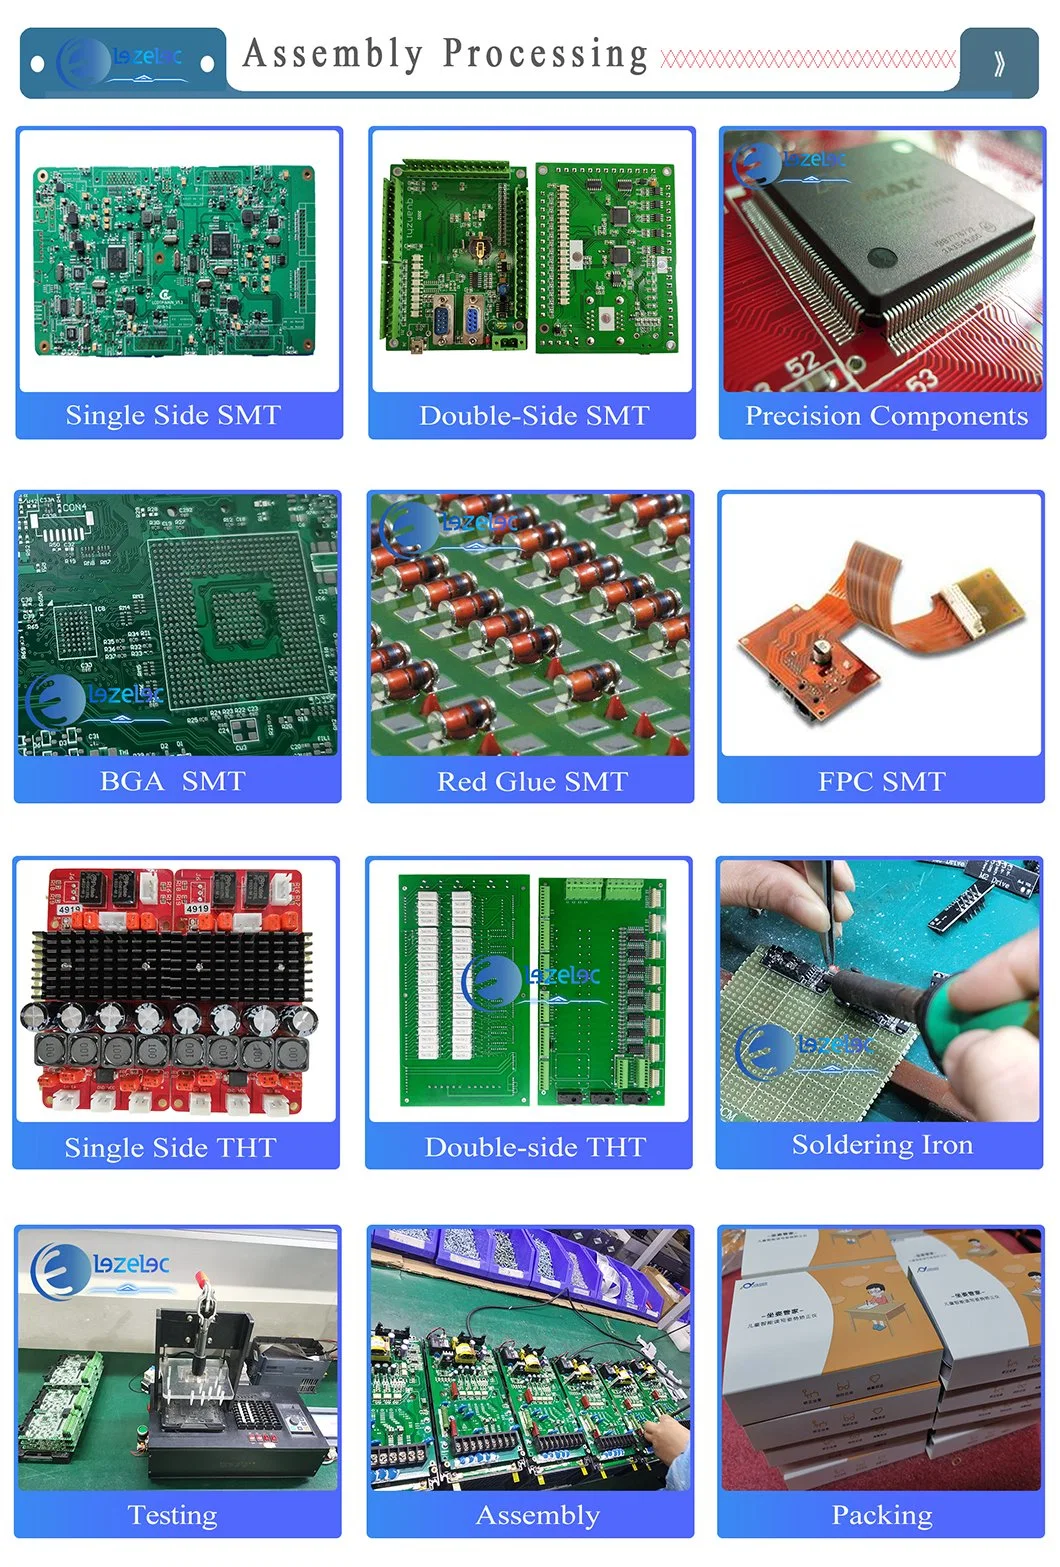 Good Quality Professional OEM/ODM One-Stop PCB Service PCB Design Manufacturer in Dongguan